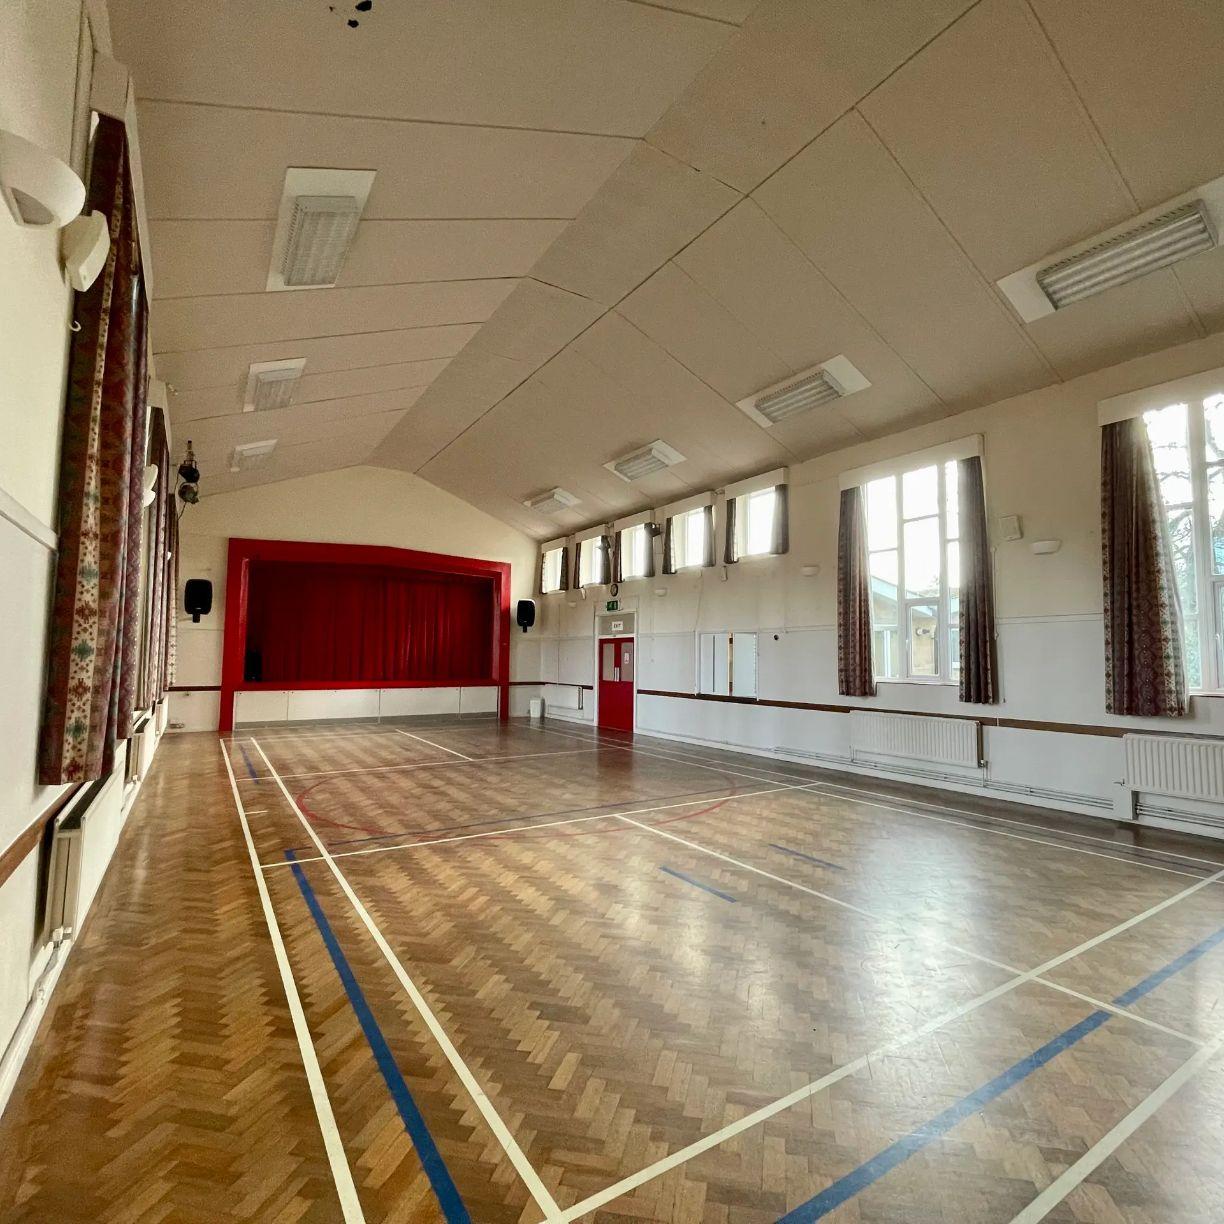 Interior of a village hall facing a stage